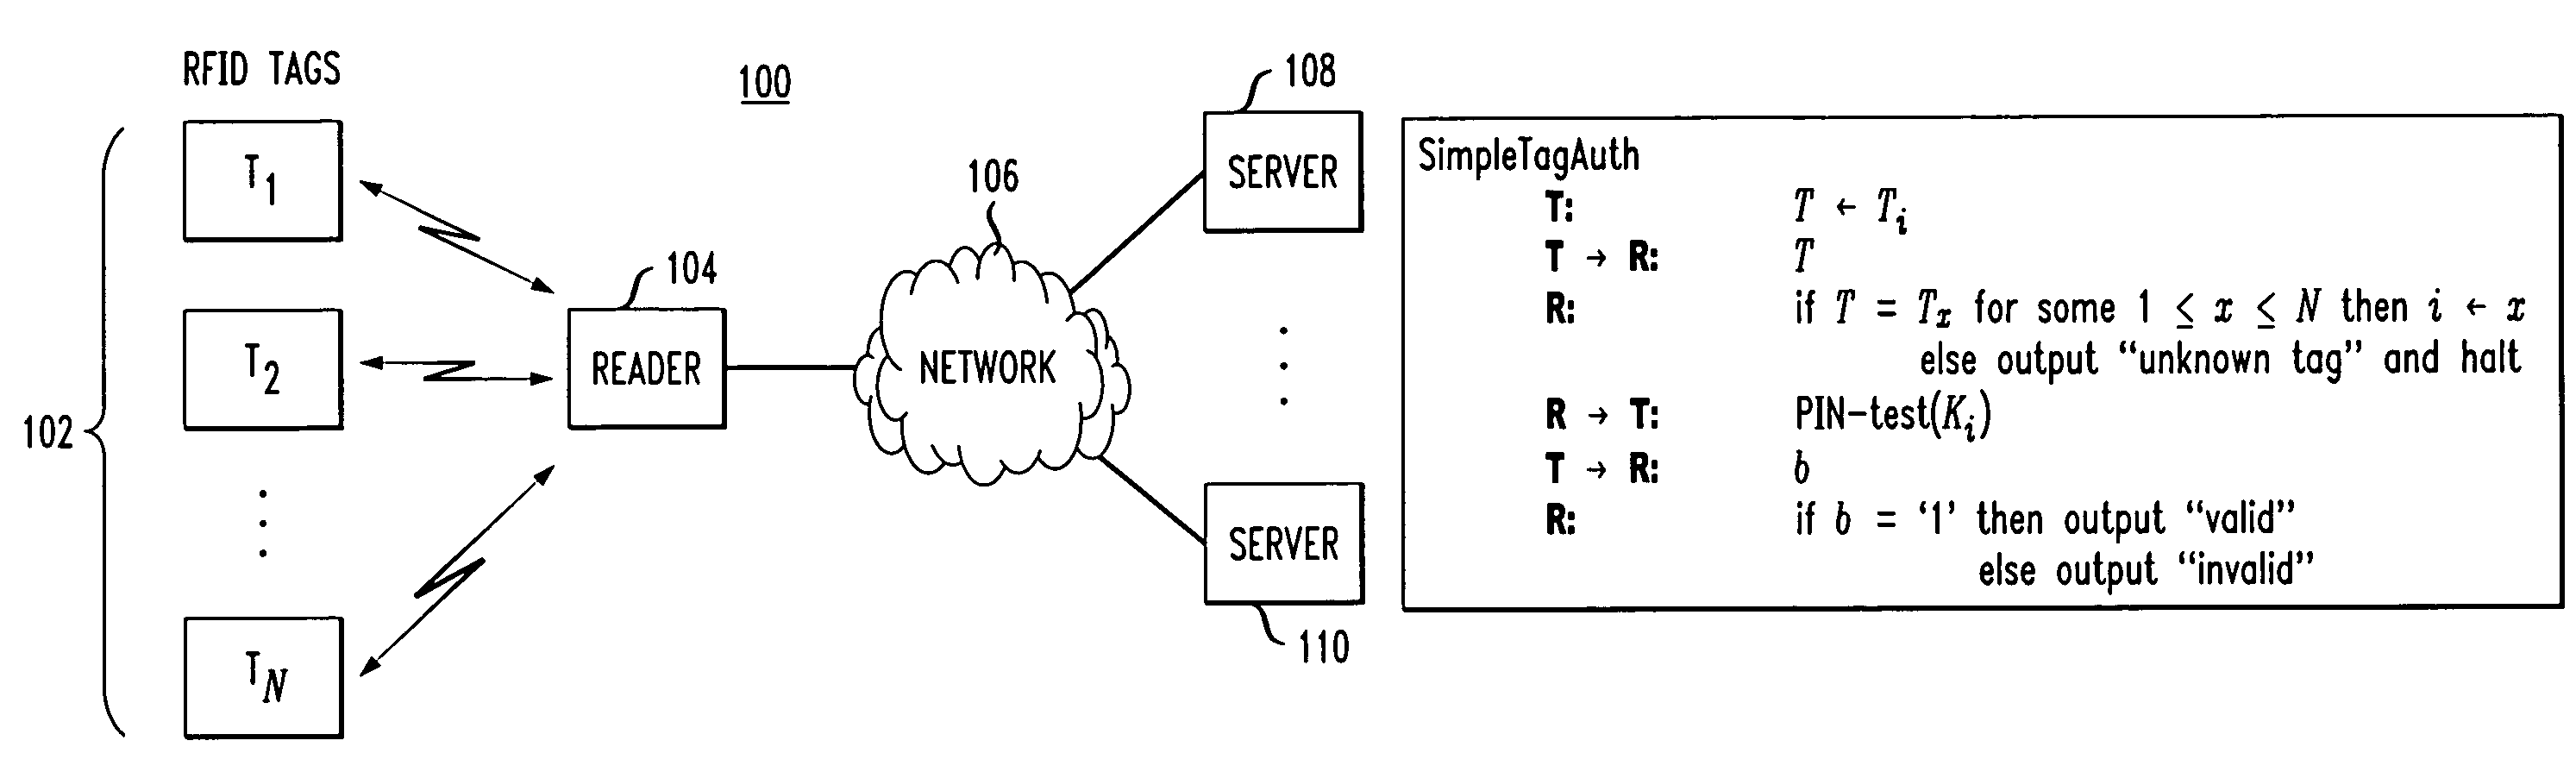 Methods and apparatus for RFID device authentication